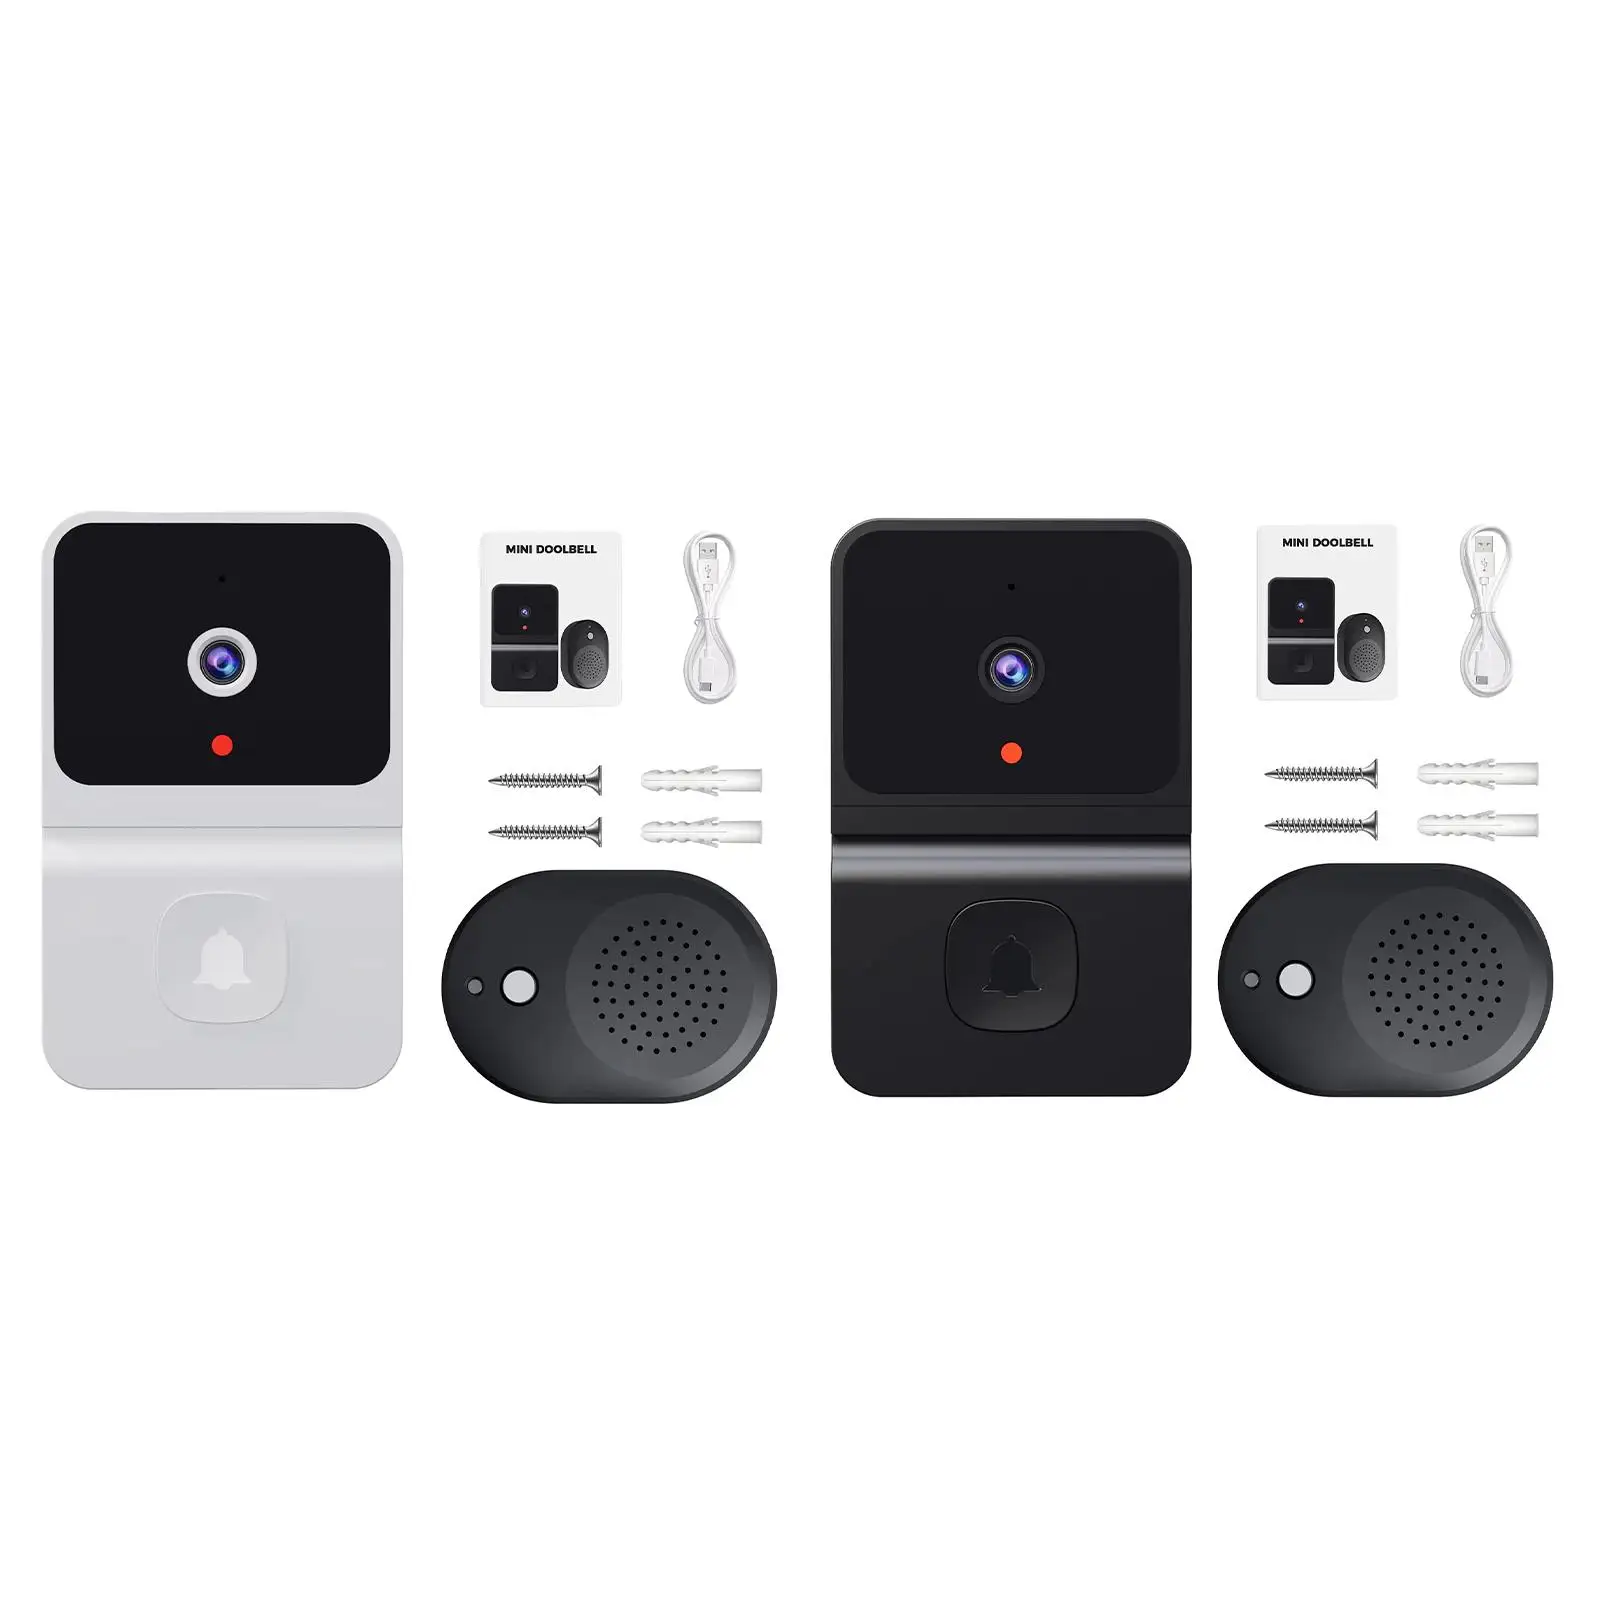 Doorbell Camera Wireless Two Way Audio Battery Operated Remote Clouds Storage Device Video Doorbell Door Chime Night View